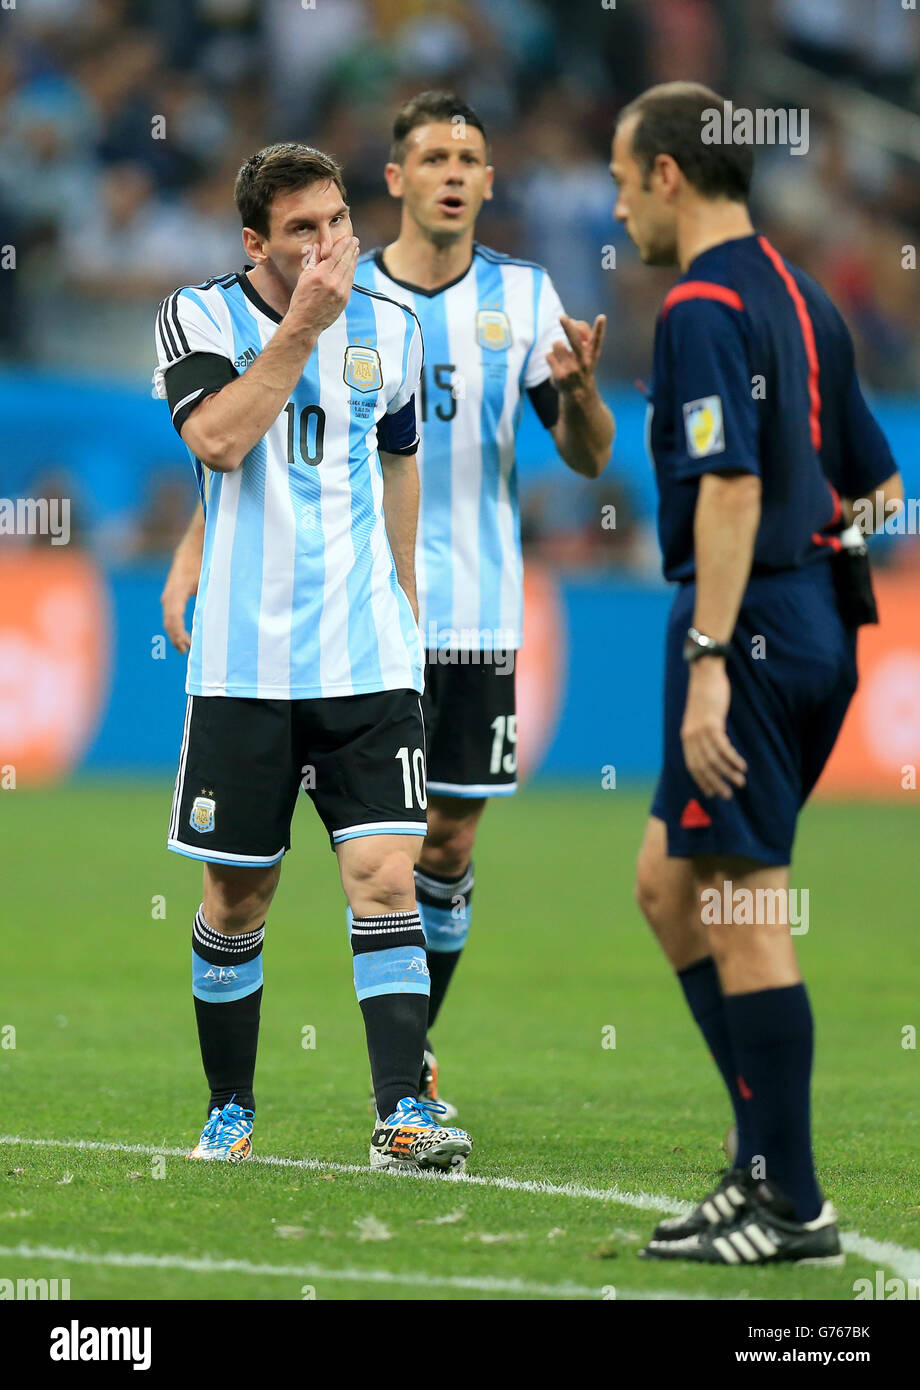 Soccer - FIFA World Cup 2014 - Semi Final - Netherlands v Argentina - Arena de Sao Paulo. Argentina's Lionel Messi rues a missed chance on goal during the FIFA World Cup Semi Final at the Arena de Sao Paulo, Sao Paulo, Brazil. Stock Photo